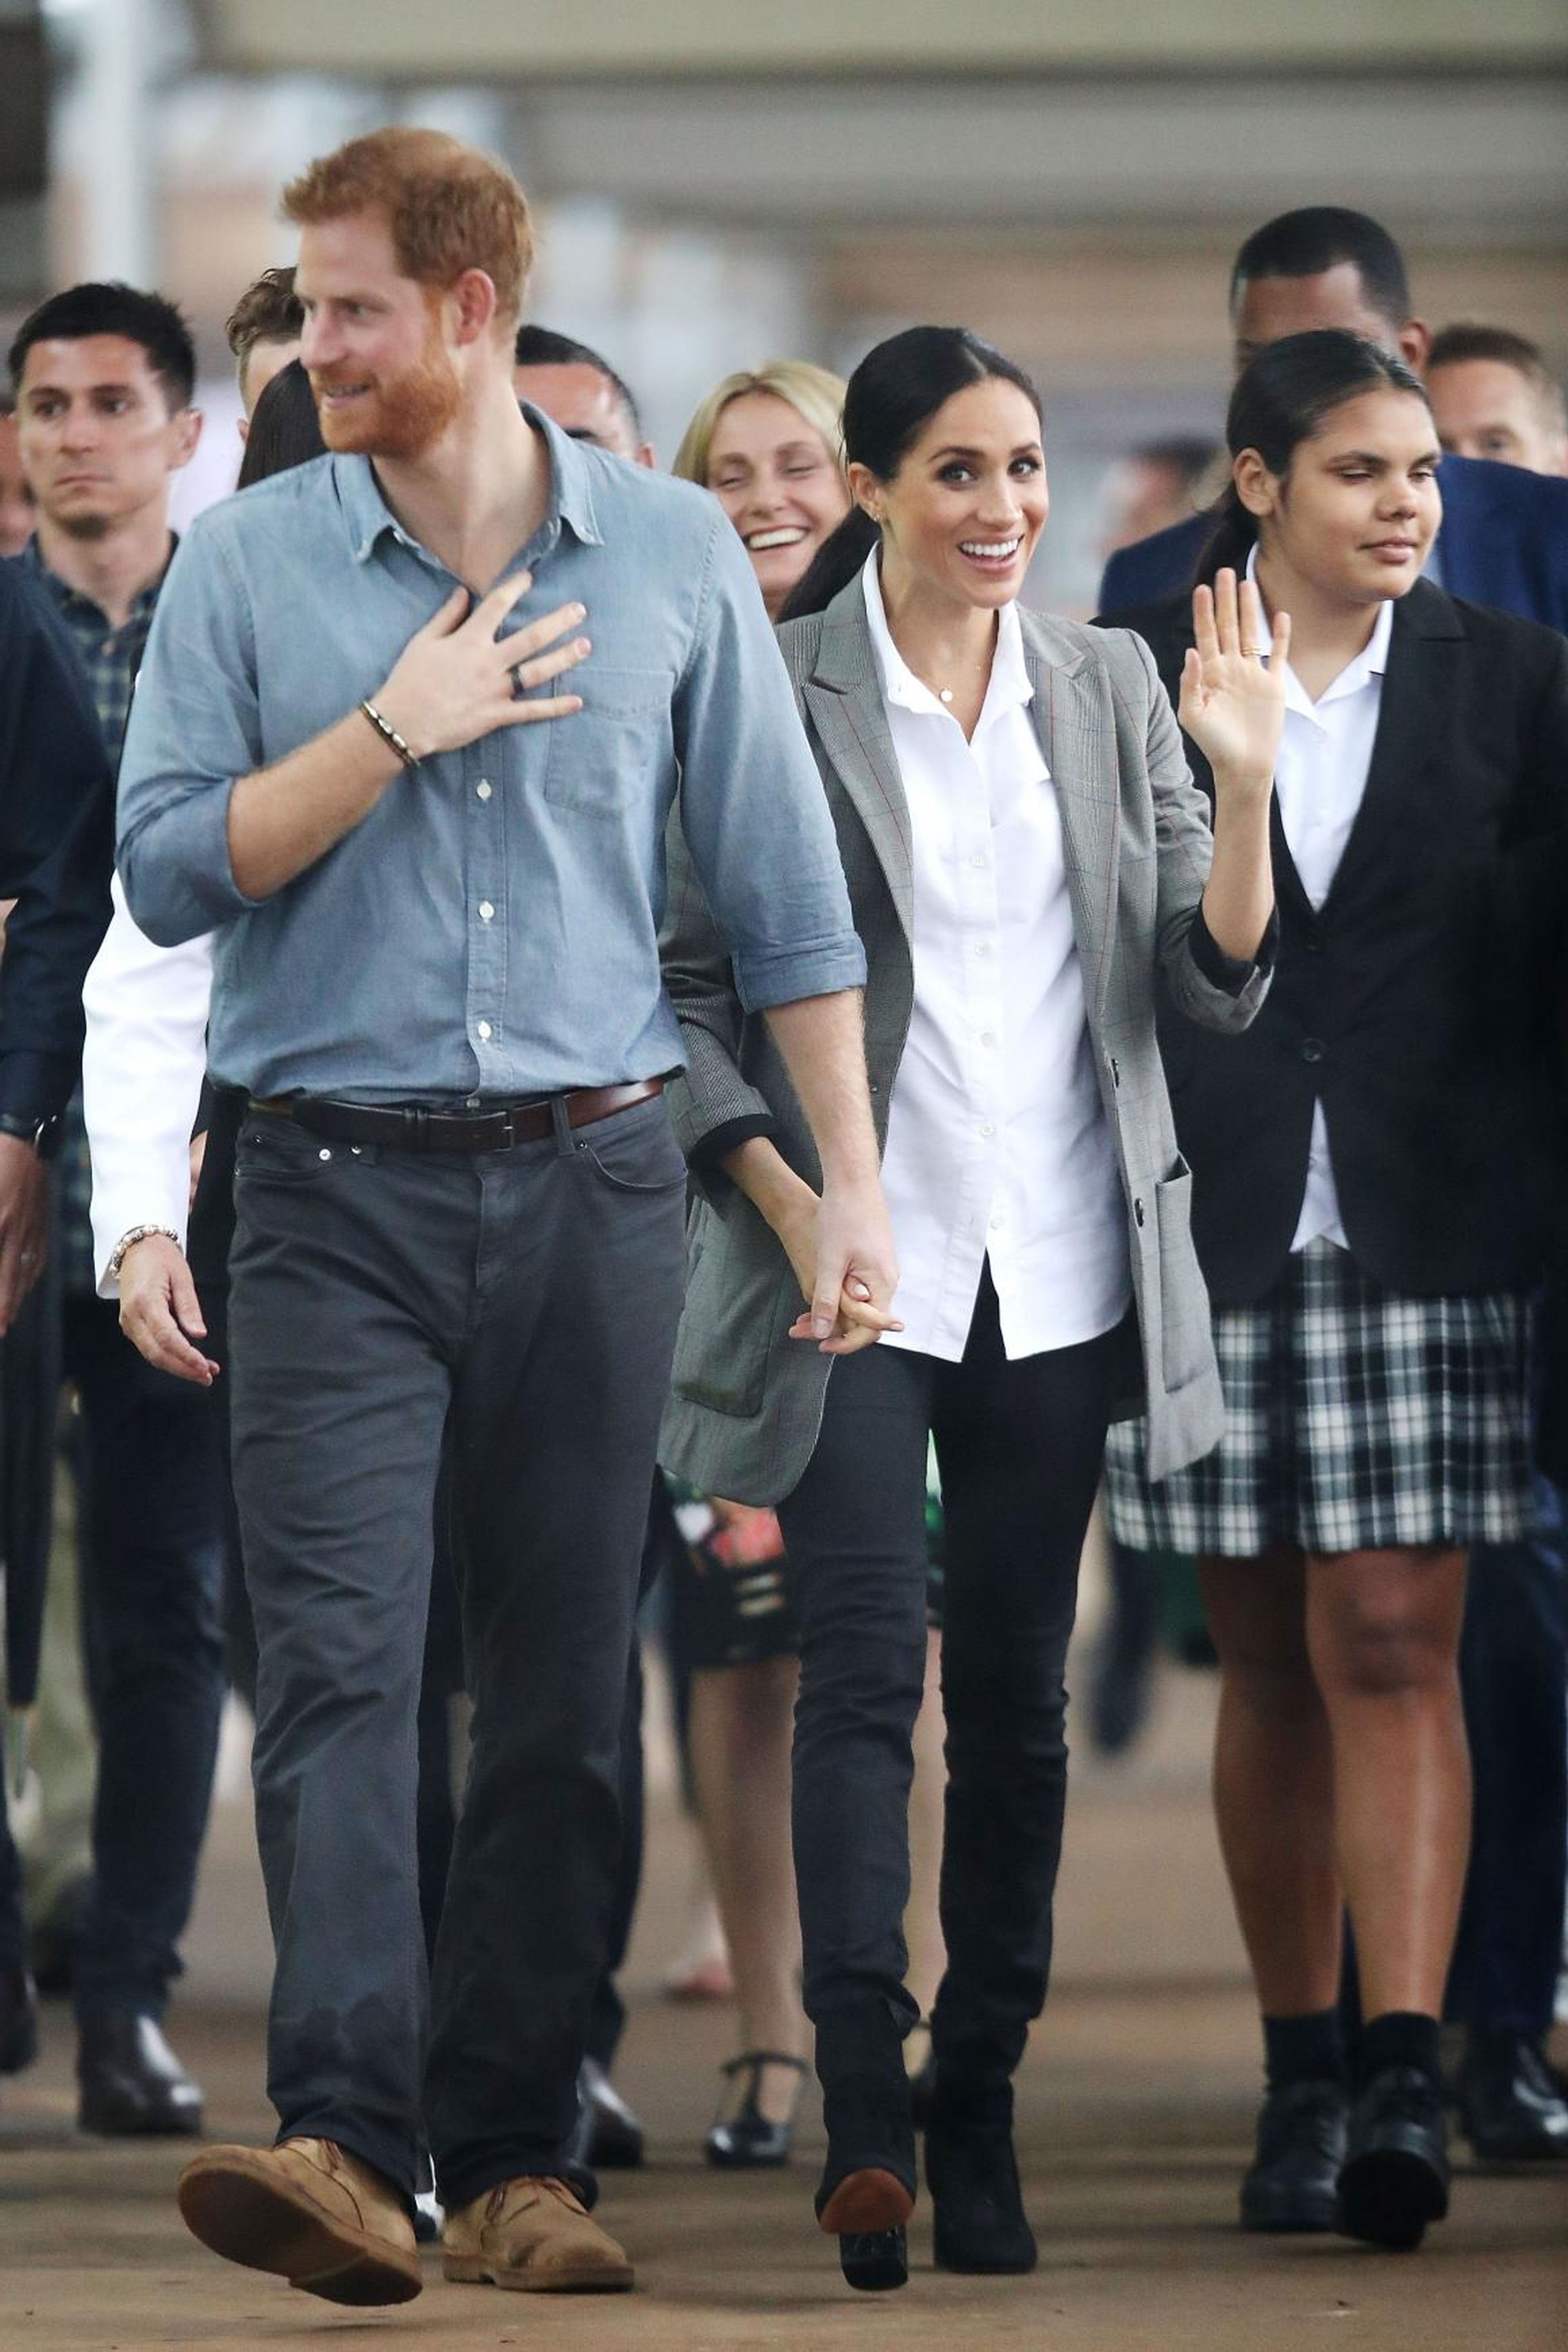 The duchess also wore the jeans during a visit to Dubbo, Australia.